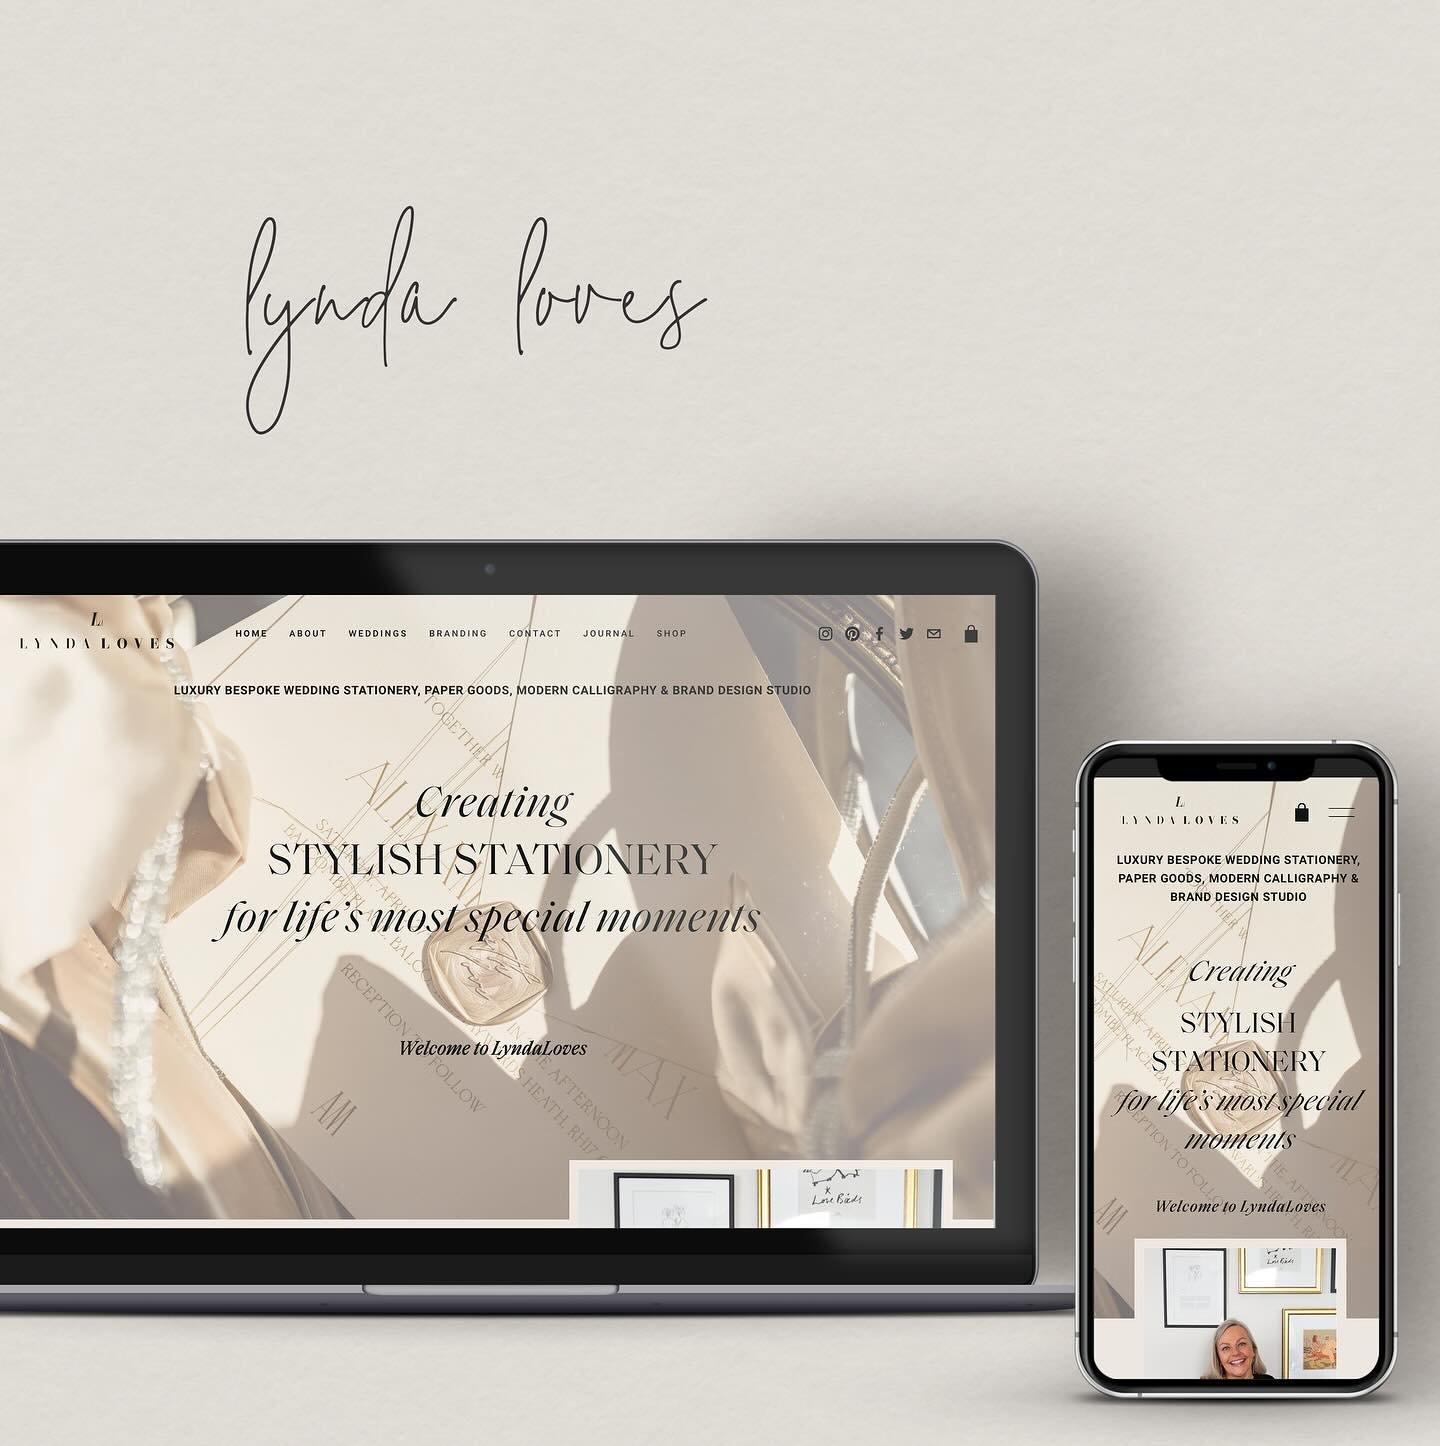 A new website launch for the very talented @lyndaathey 

Lynda has been such a joy to work with. She had such a clear vision for how she wanted the site to represent her business and it has been a wonderful experience to create that for her. Her work